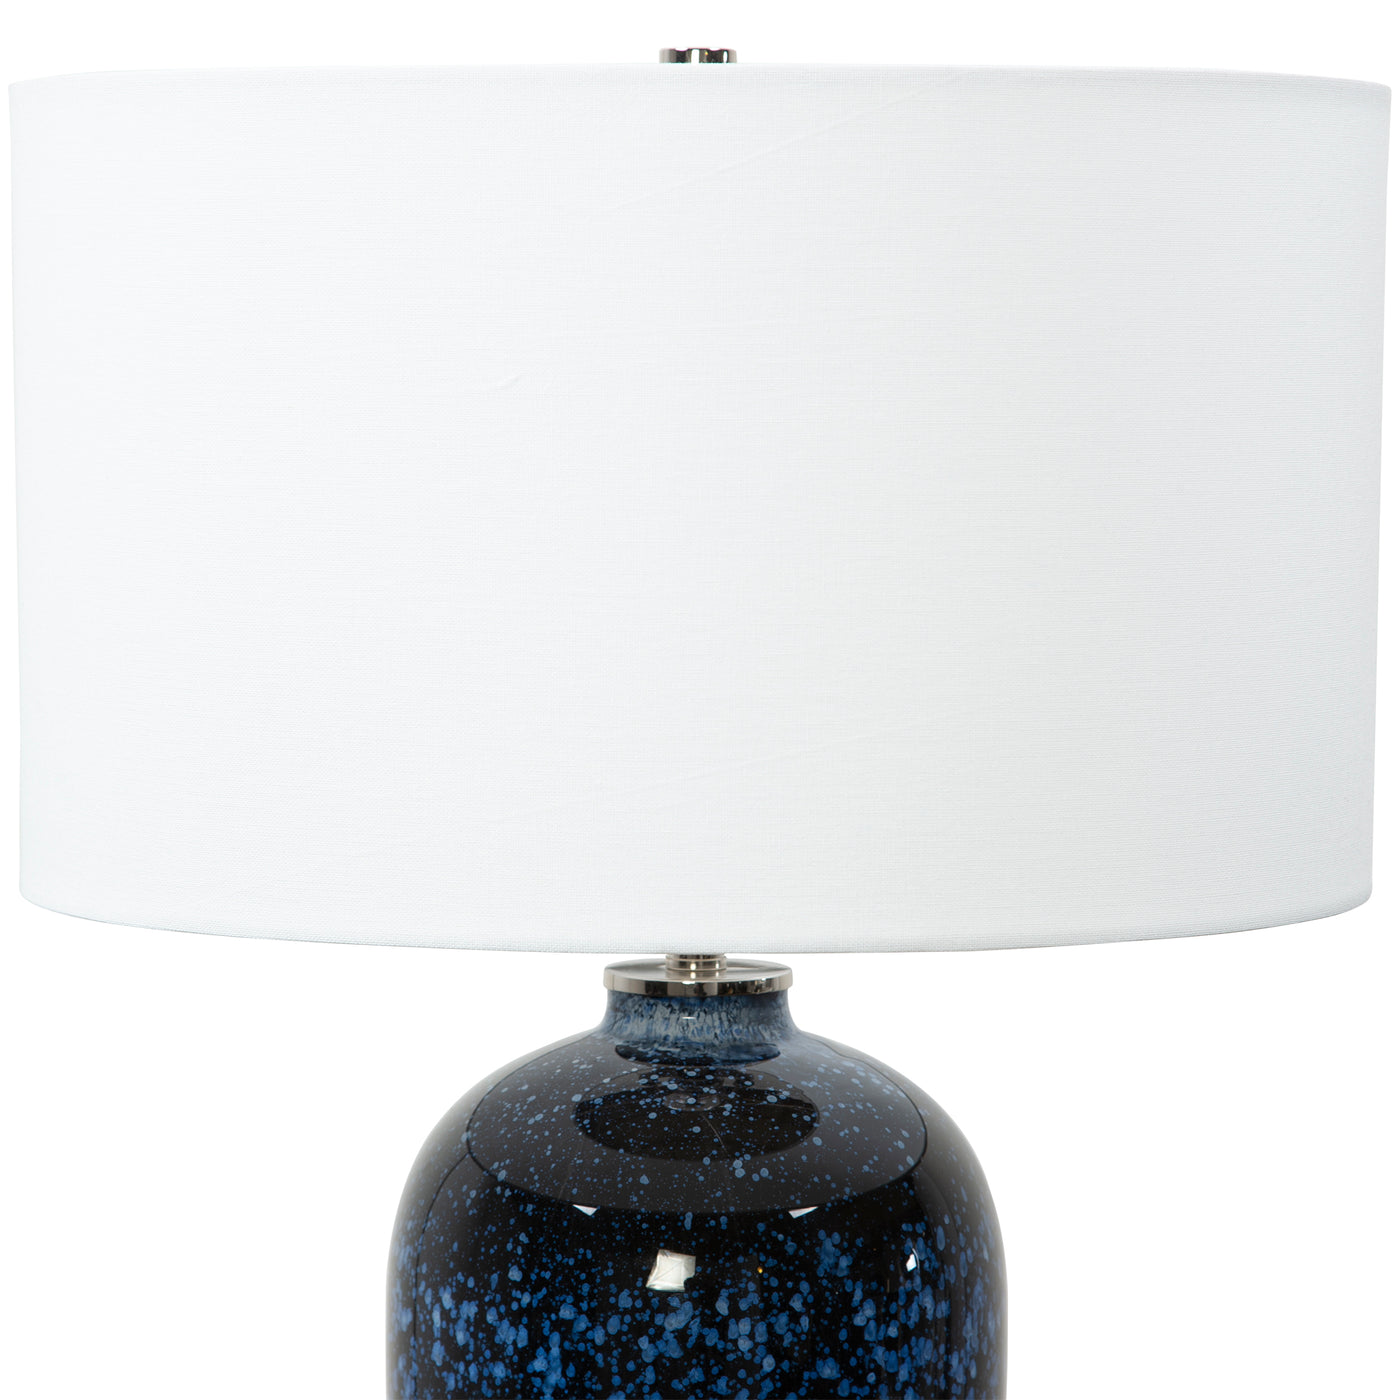 Reminiscent Of The Evening Sky, This Beautiful Table Lamp Features An Art Glass Base With Shades Of Navy, Cobalt And White...